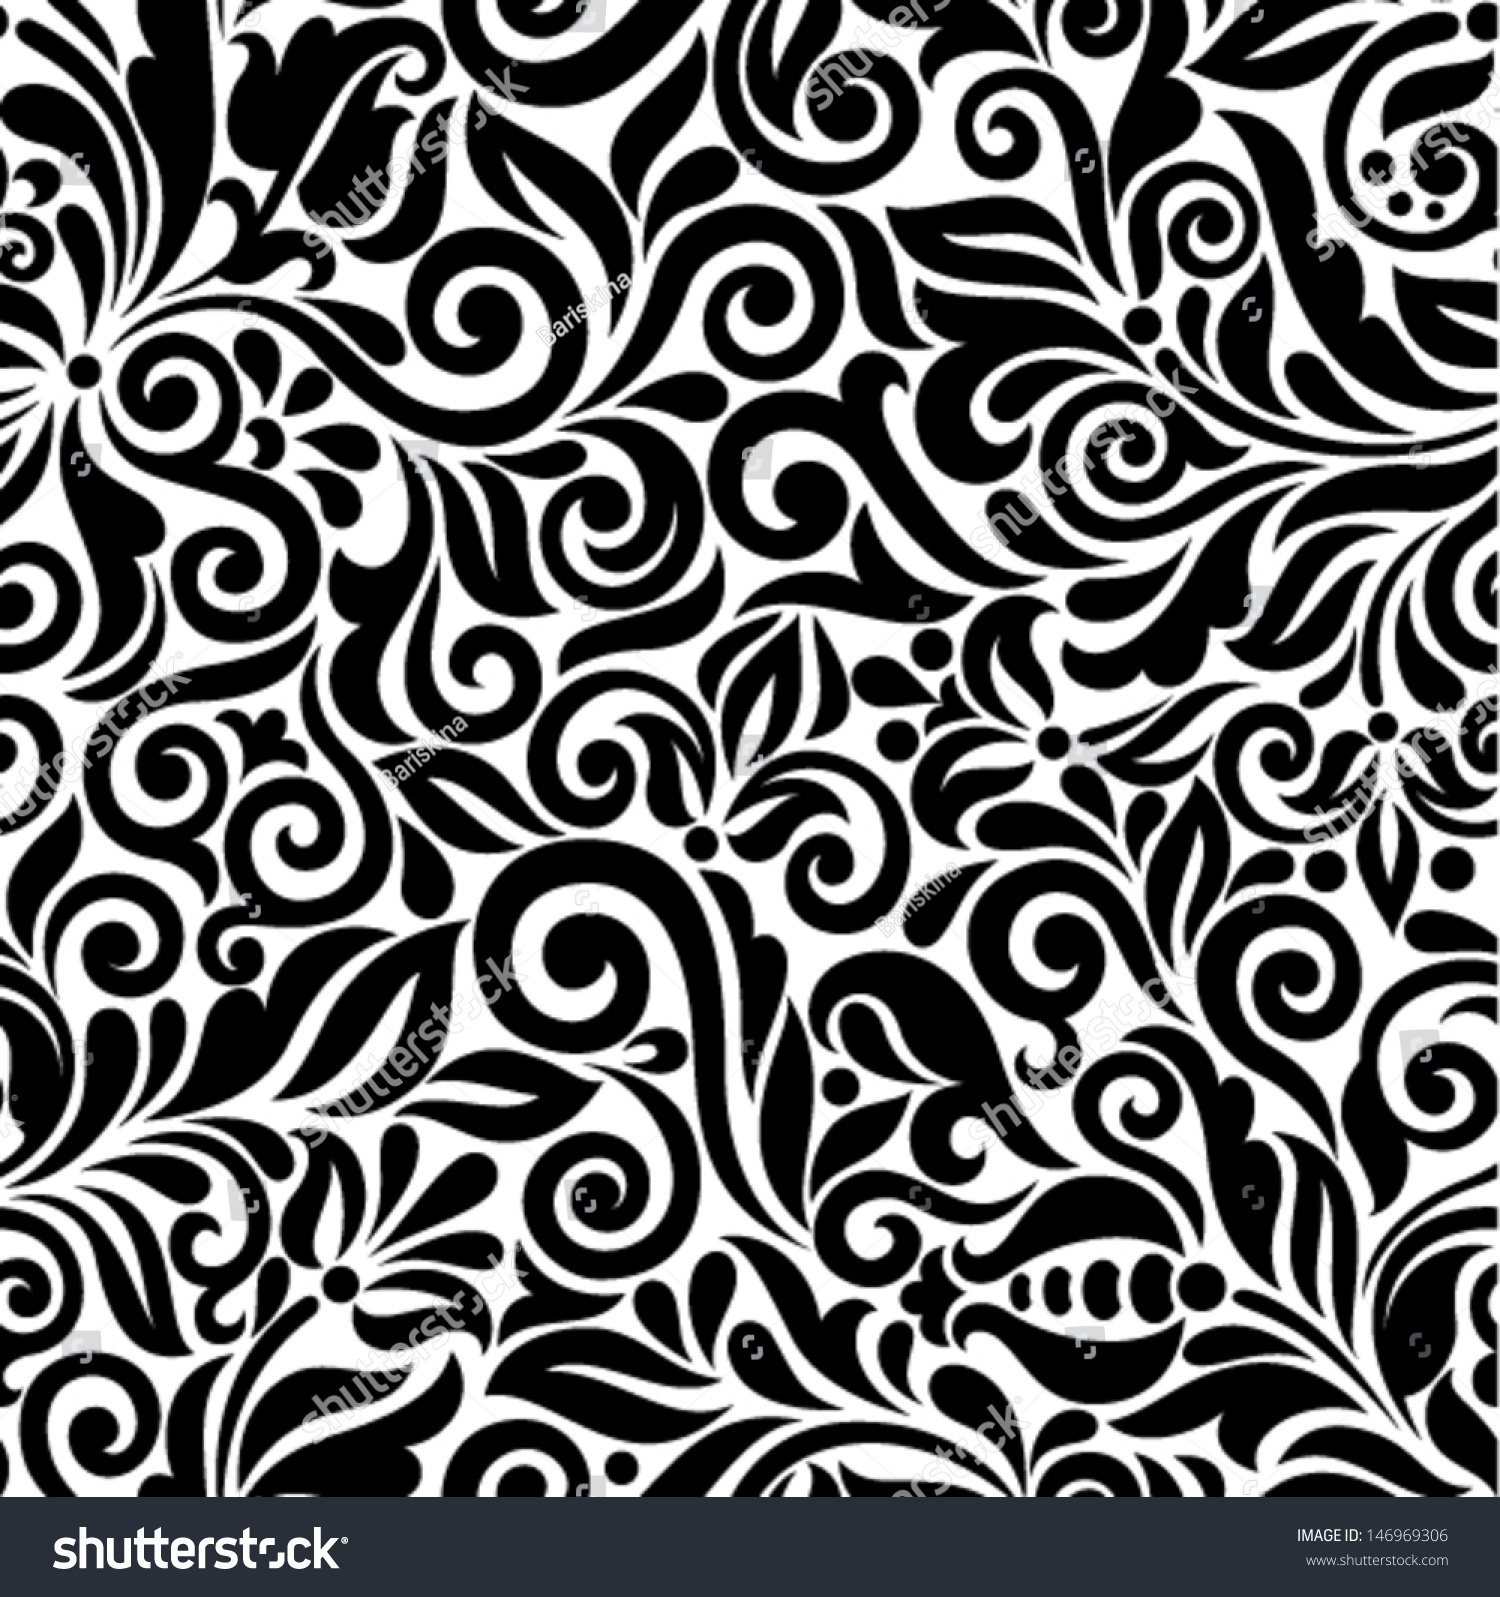 Ornamental Floral Background Seamless Pattern Your Stock Vector ...